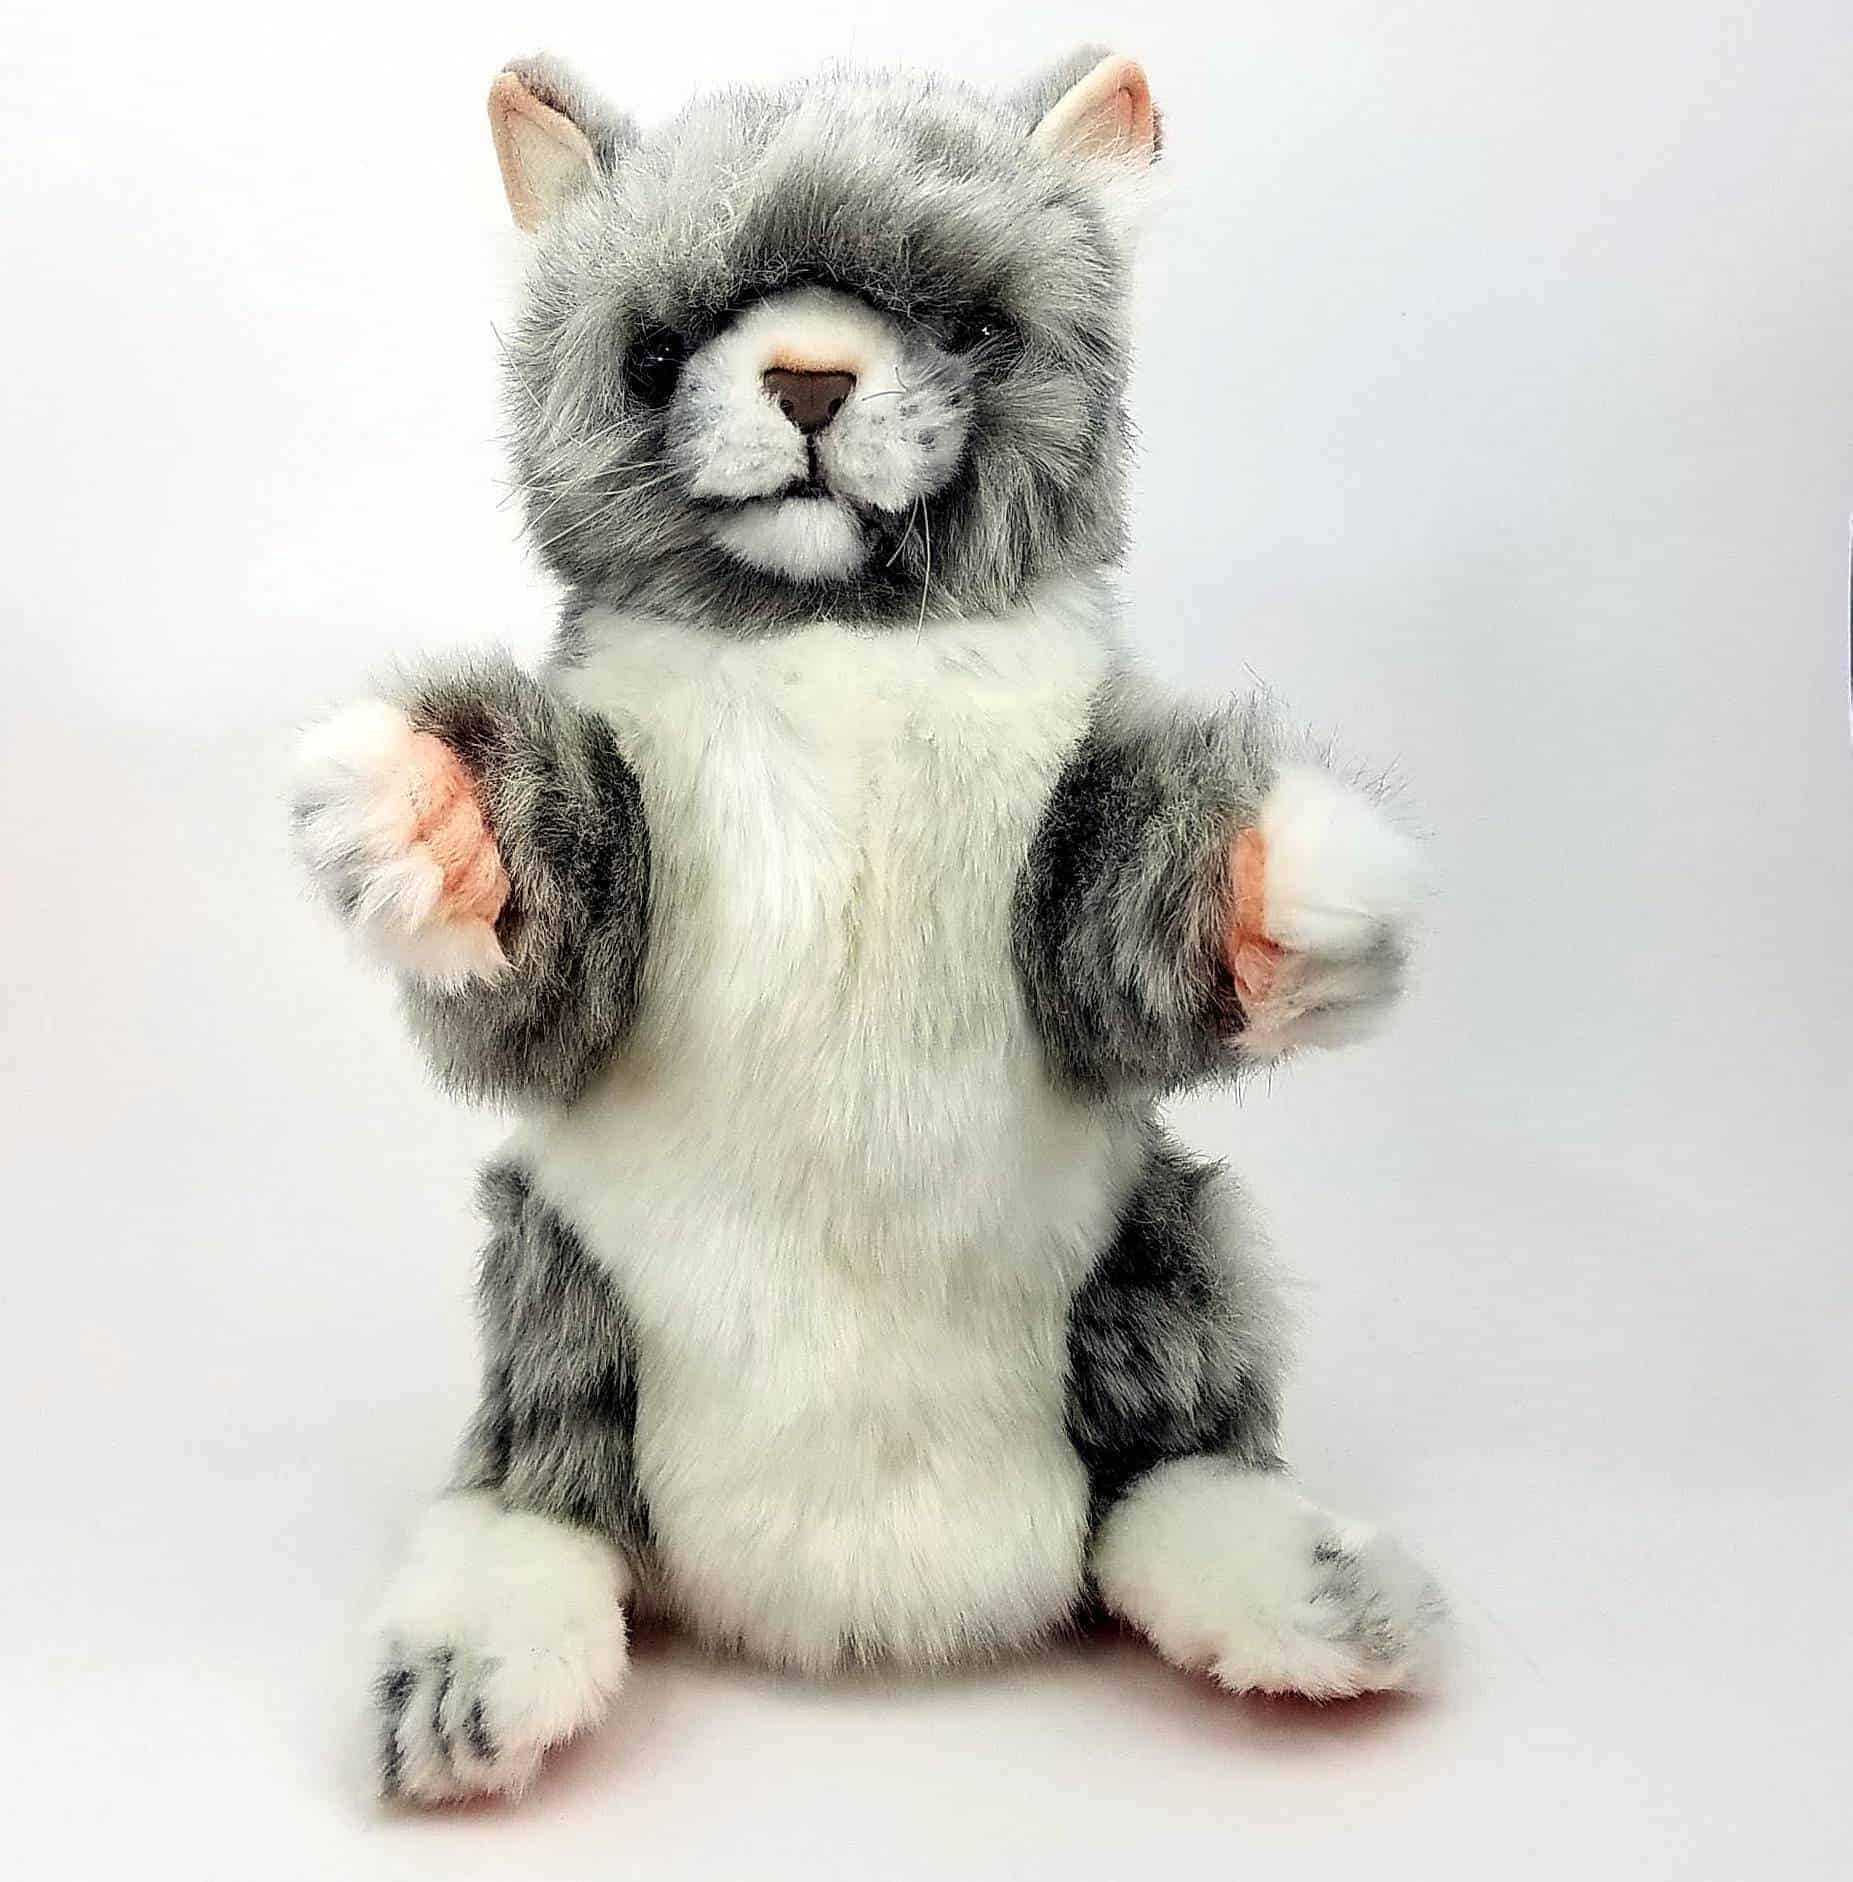 This Jacquard Cat Hand Puppet by Hansa True to Life Looking Soft Plush Animal Learning Toy is made with love by Premier Homegoods! Shop more unique gift ideas today with Spots Initiatives, the best way to support creators.